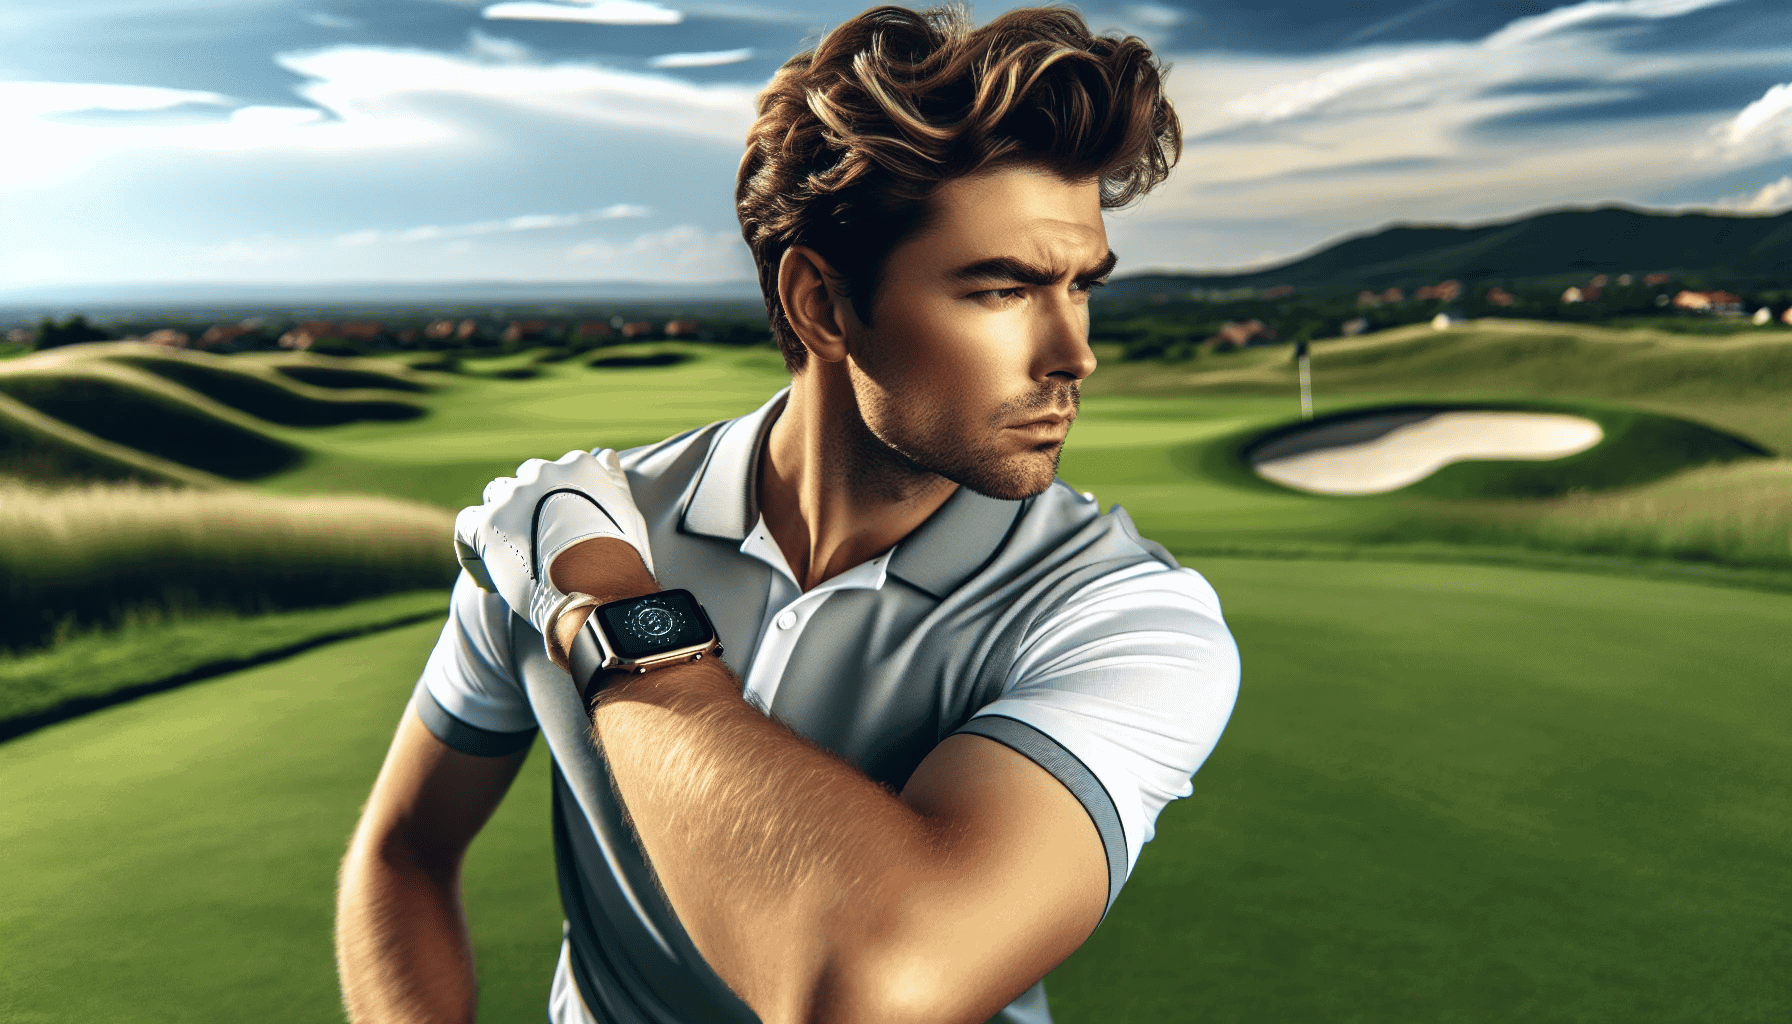 A golfer wearing a smartwatch while playing golf